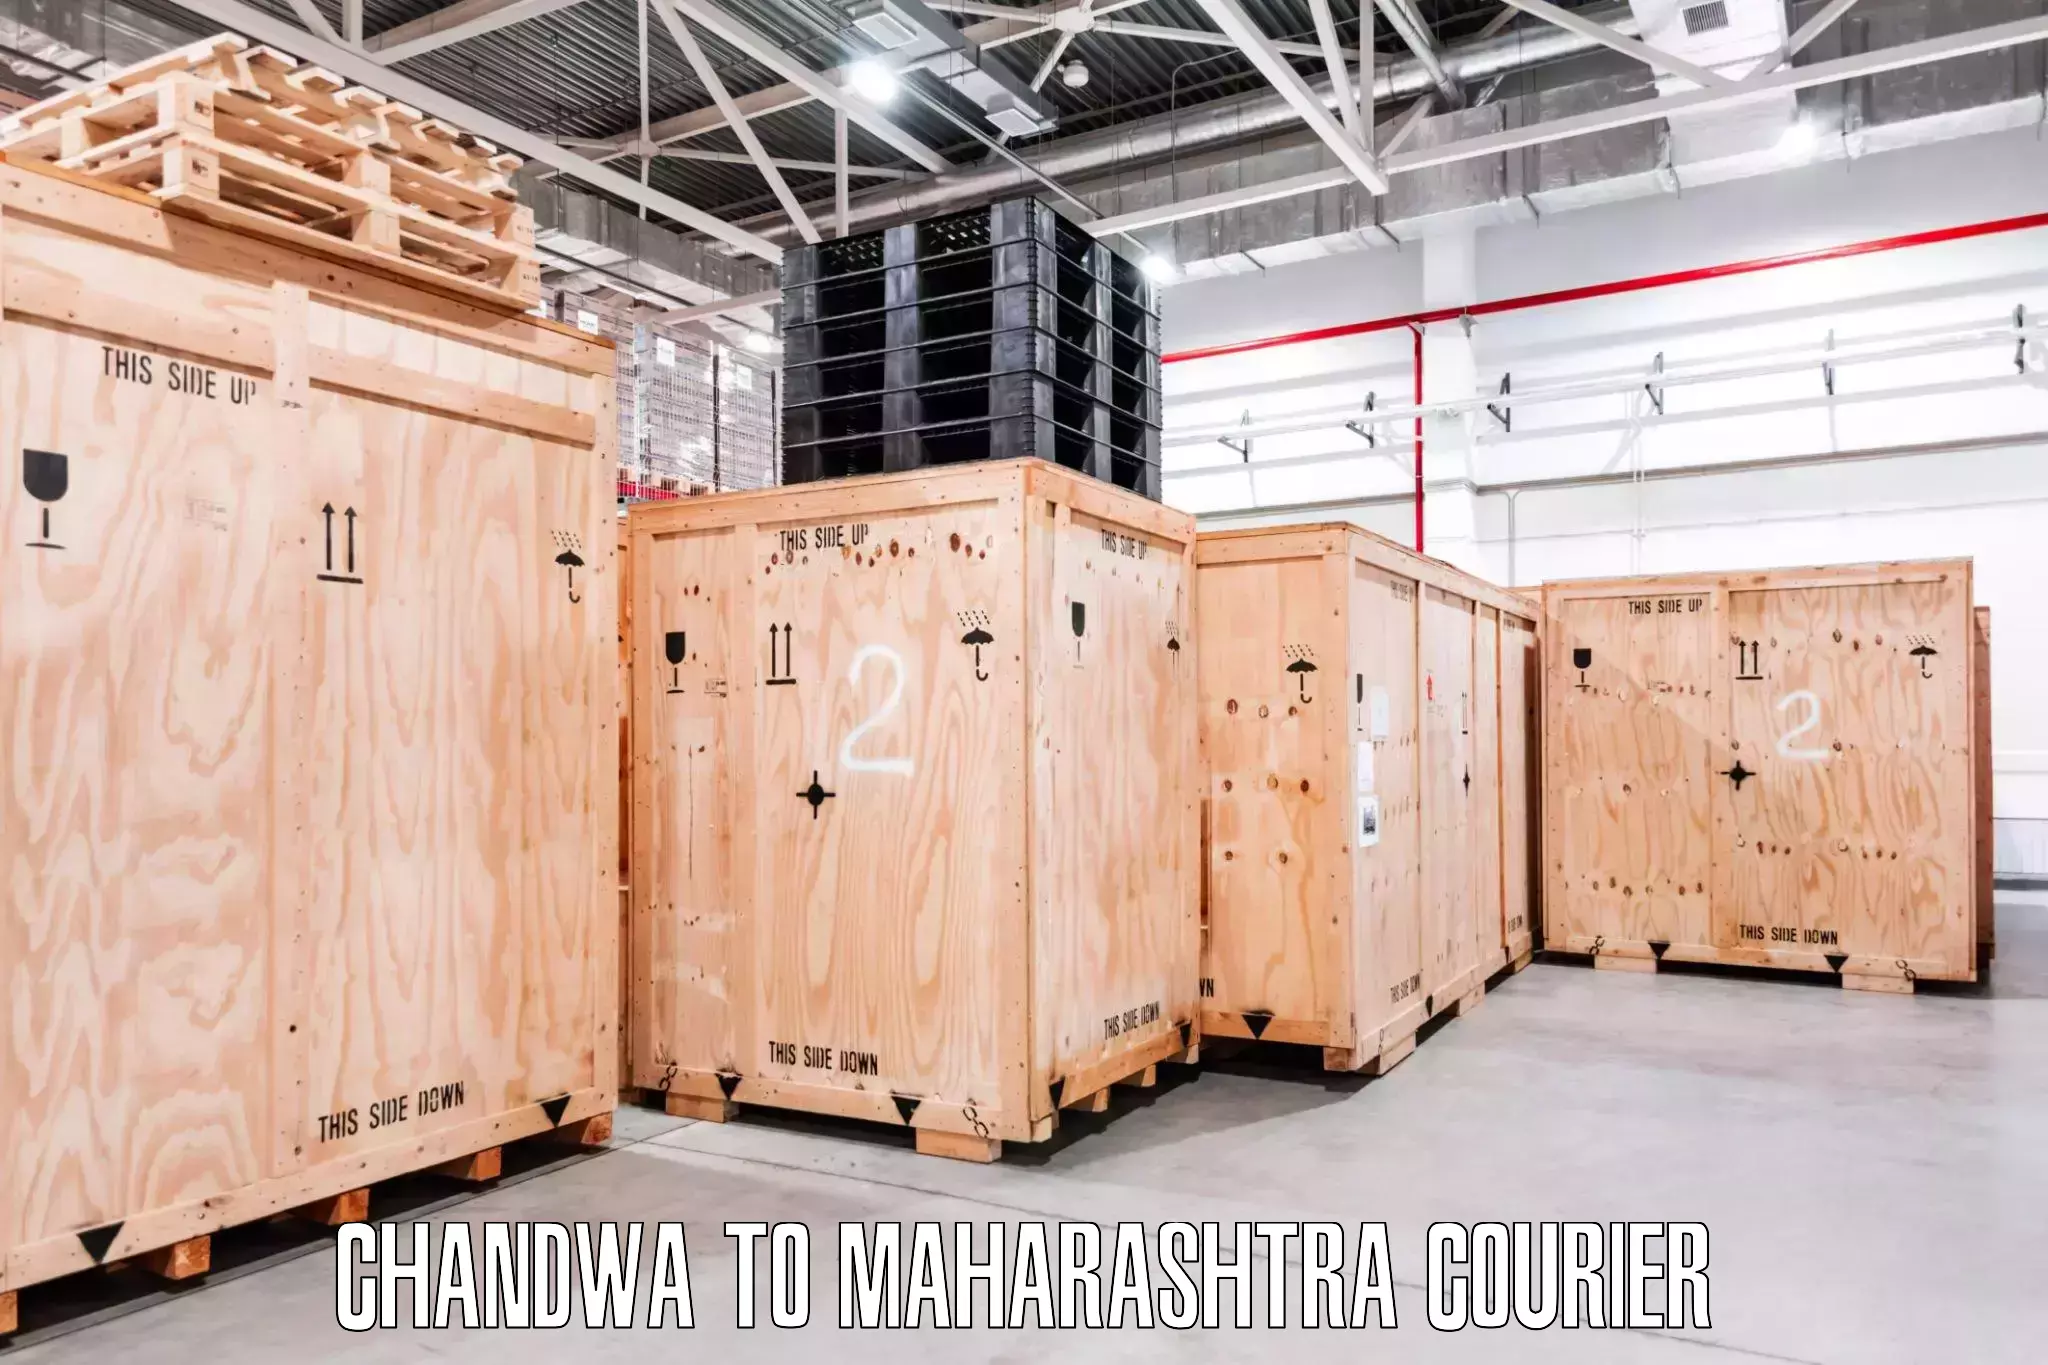 High-quality moving services in Chandwa to Ambajogai